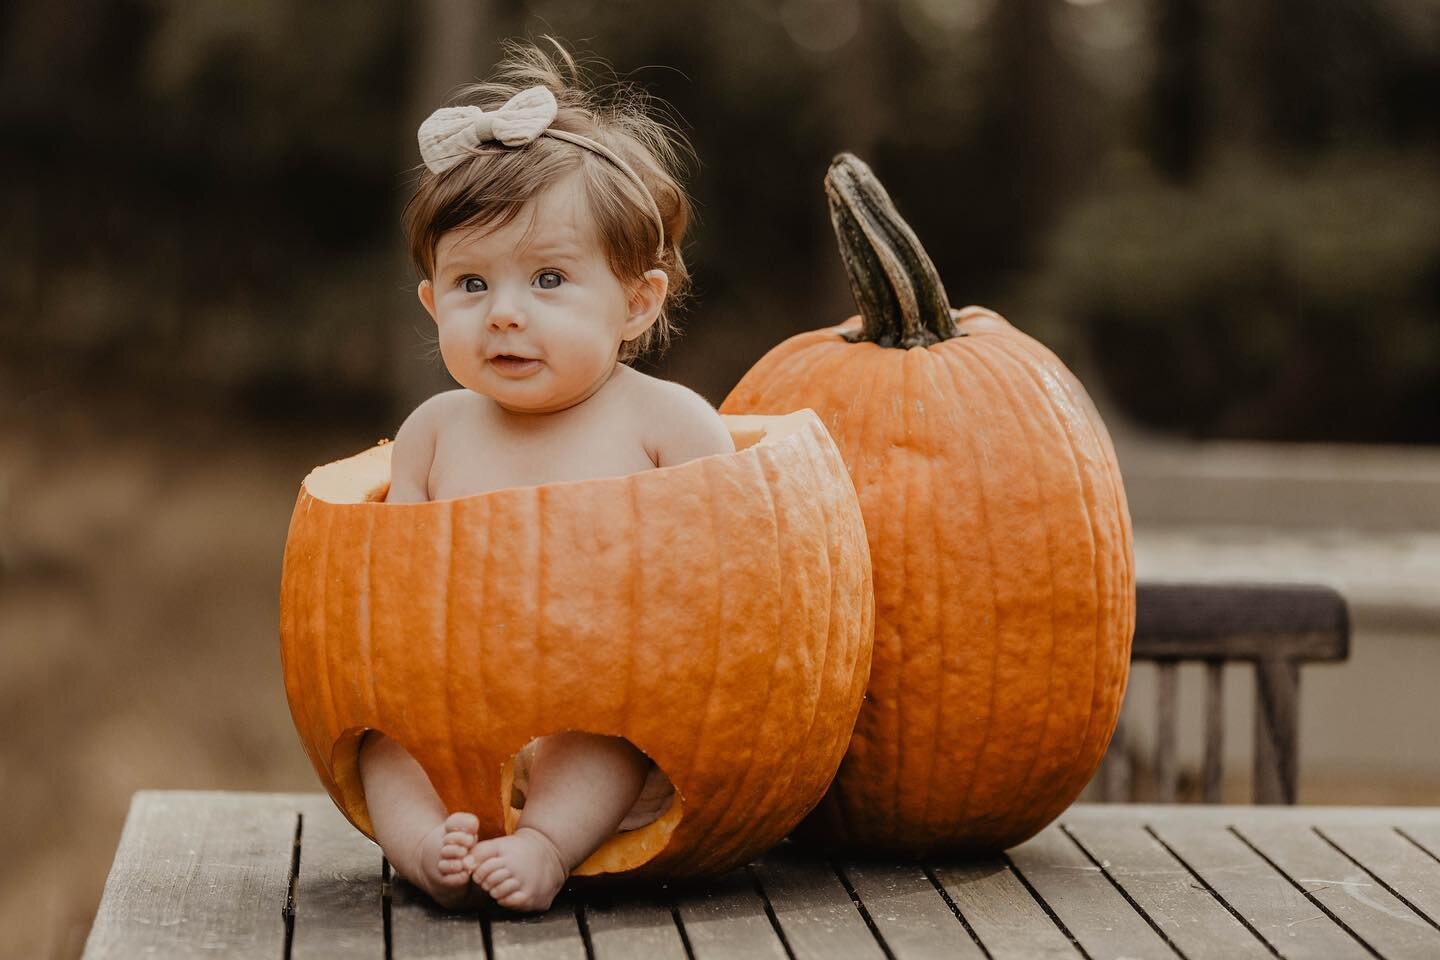 Happy Halloween from the cutest pumpkin in the patch 🎃👻